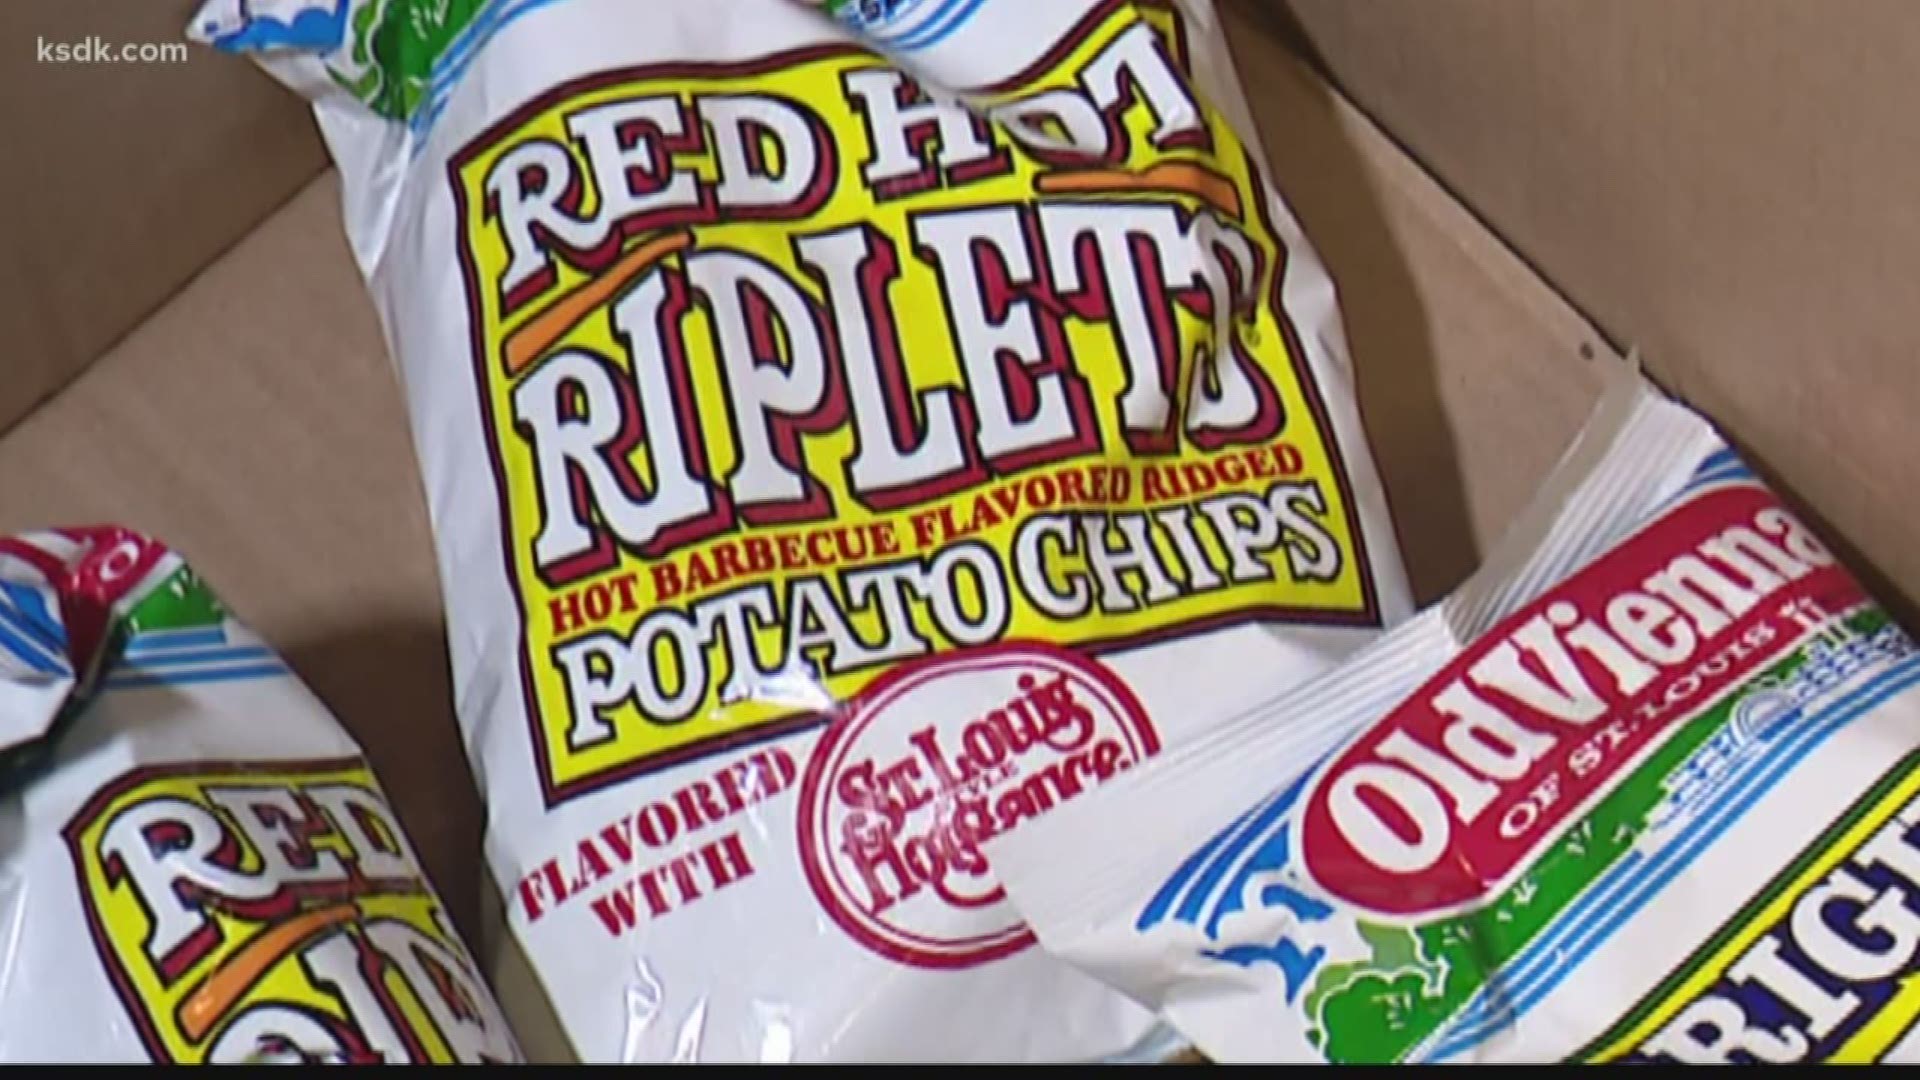 Red Hot Riplets are so St. Louis.